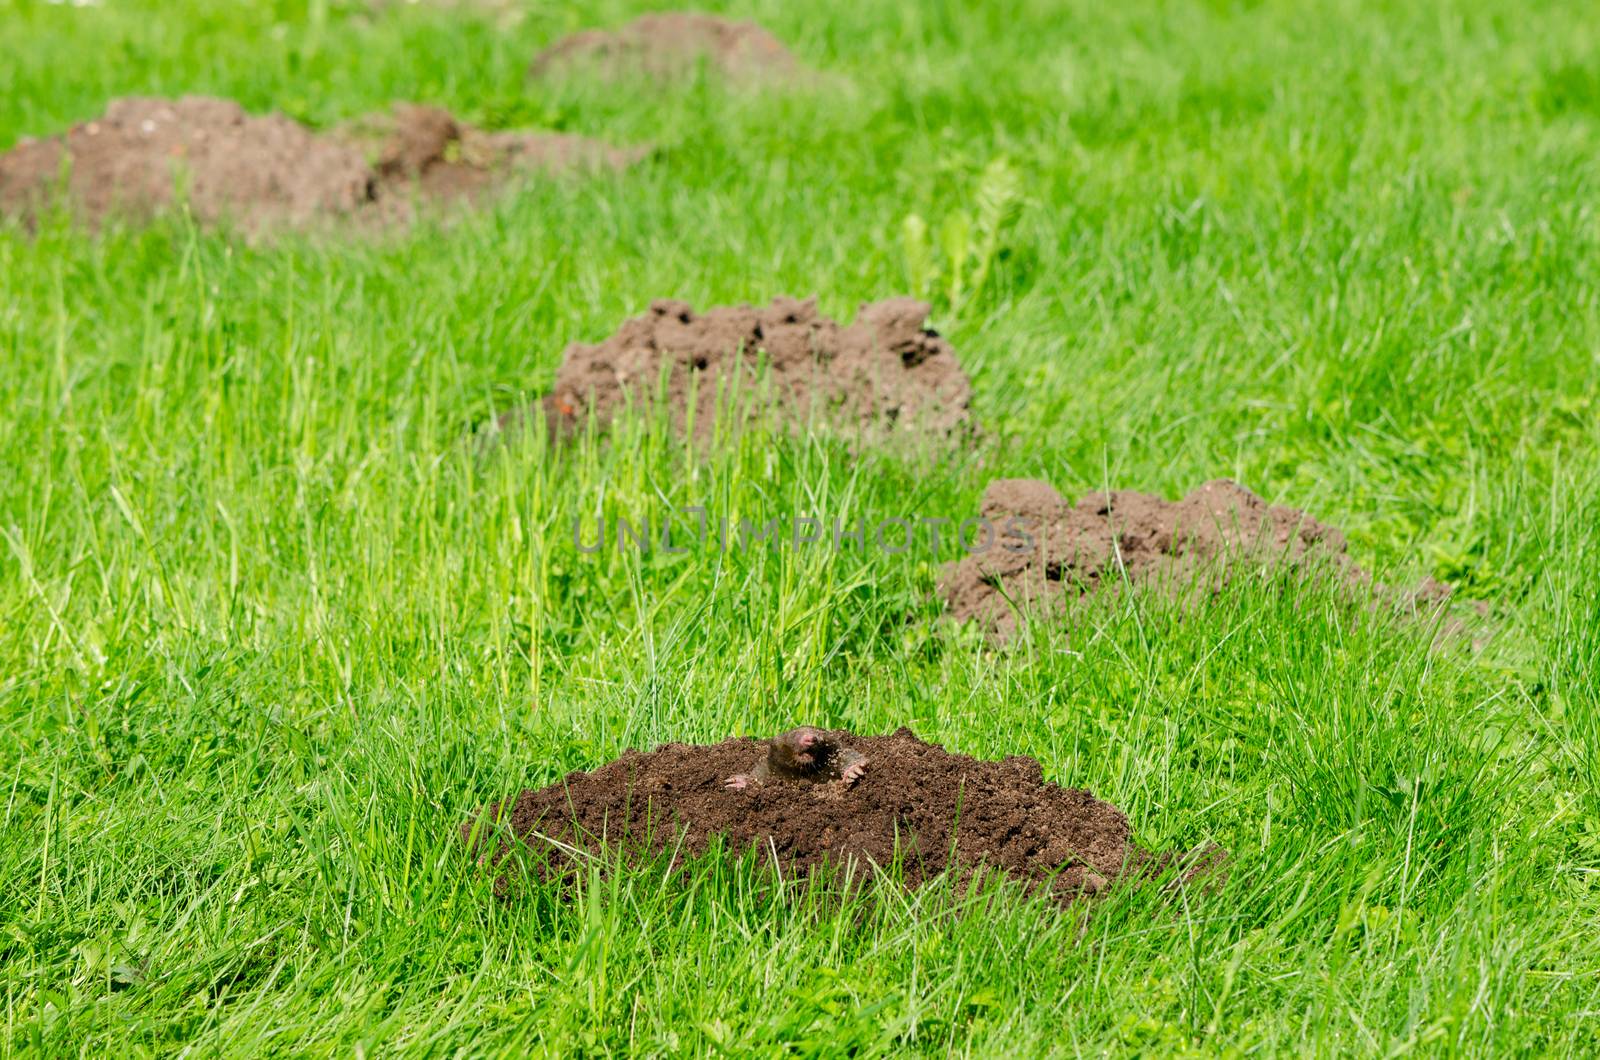 Mole hills on lawn grass and animal head in soil by sauletas